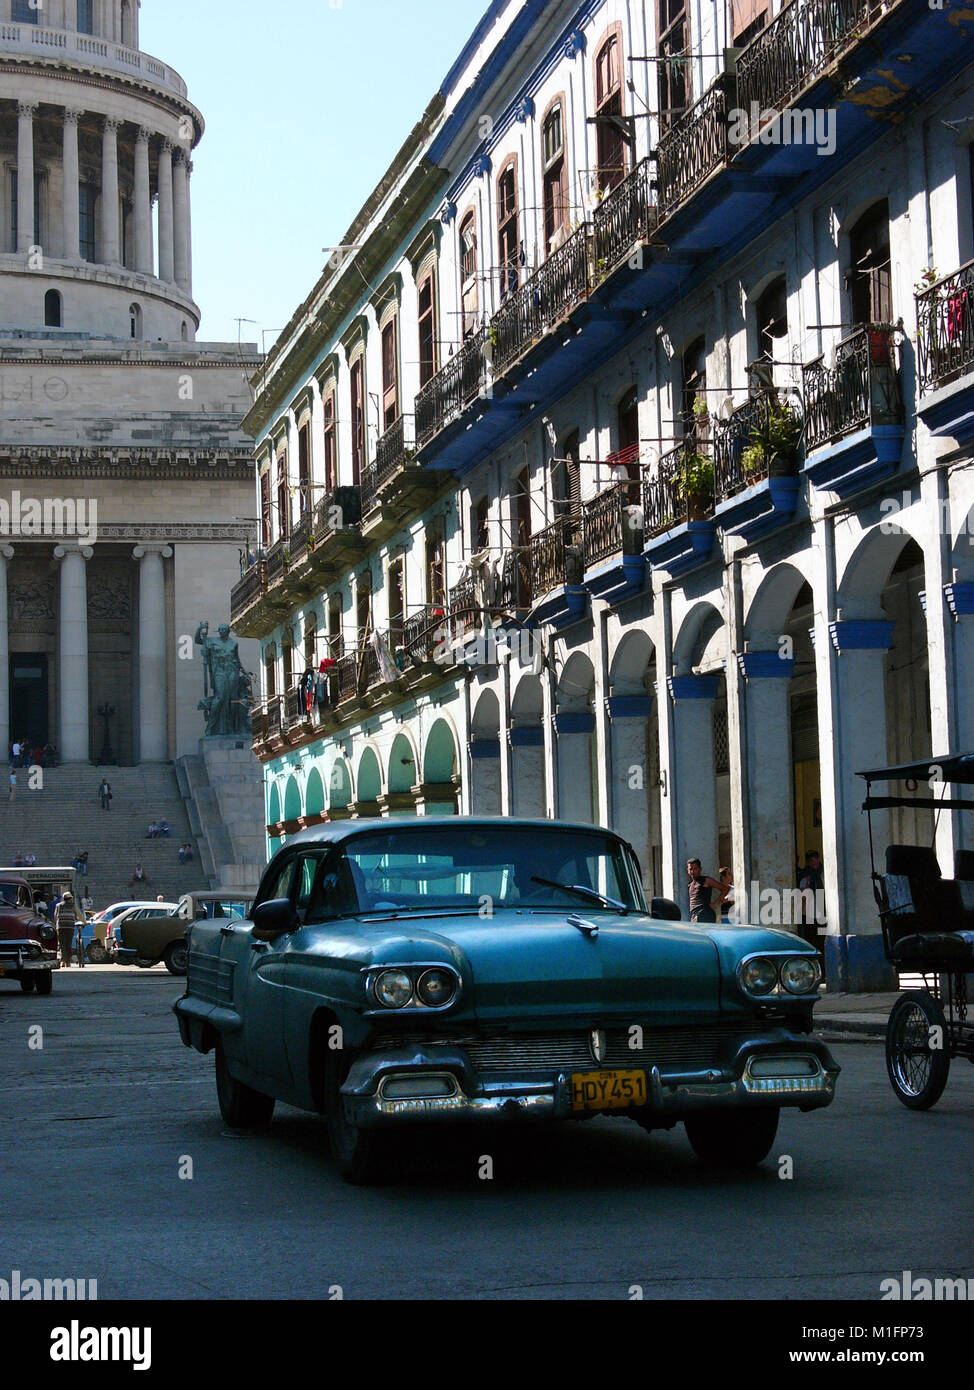 Feb 15, 2006; Havana, CUBA; One of many Cuban Maquinas, aka Yank tanks or pre 1960 American Classic cars in the streets of Havana with Capitolio Nacional (National Capitol building). One in eight cars in Cuba today is a pre-1960s American brand Ford, Chevrolet, Cadillac, Chrysler, Packard and other classic models. The Republic of Cuba is located in the northern Caribbean and south of the United States. The first European to visit Cuba was explorer Christopher Columbus in 1492. Centuries of colonial rule and revolutions followed. Batista was deposed by Fidel Castro and Che guevara in 1953. Aft Stock Photo